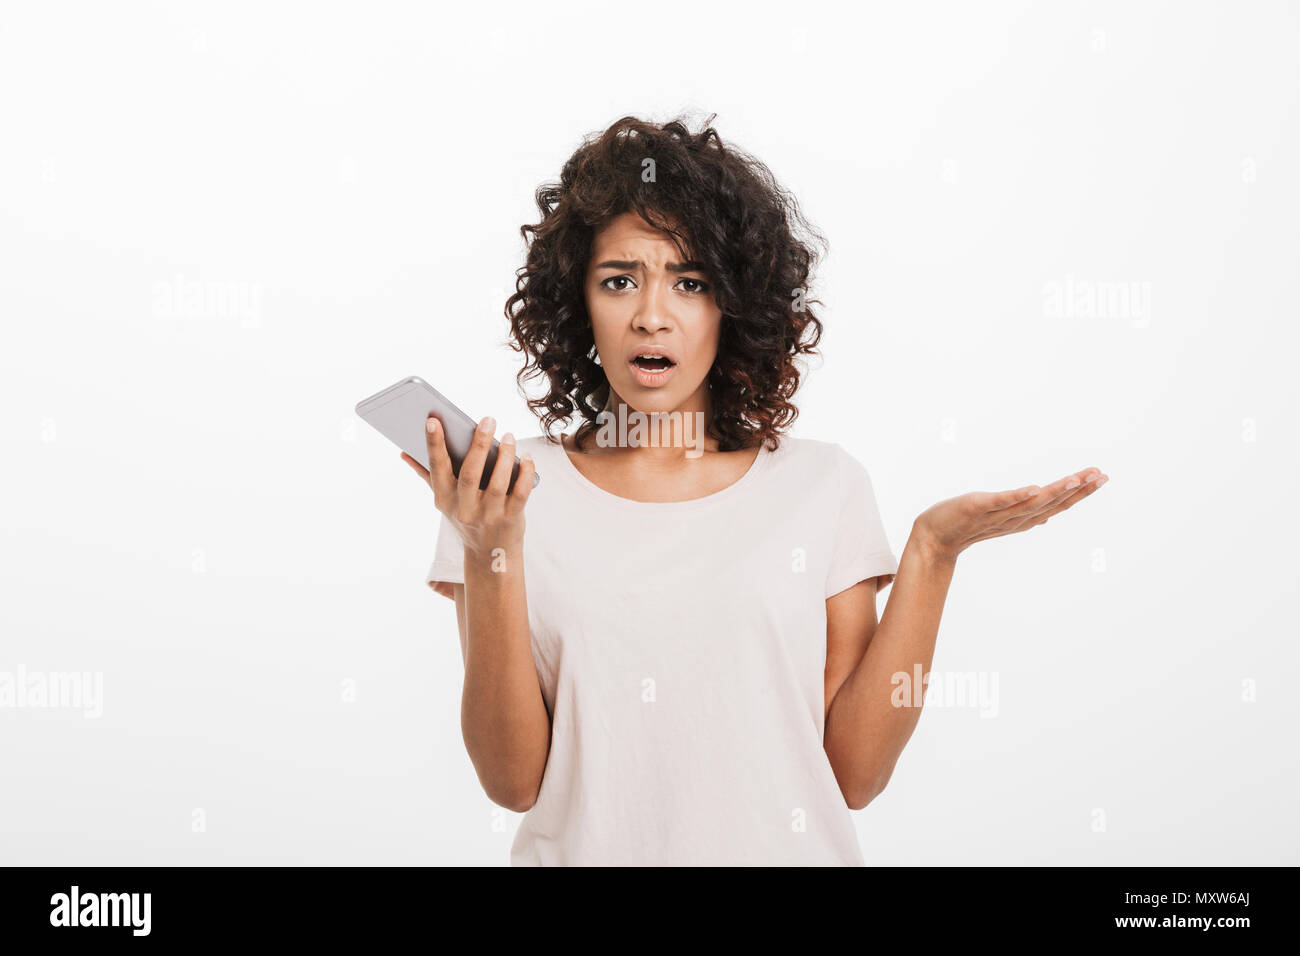 Portrait of confused puzzled woman with afro hairstyle wearing t-shirt holding cell phone and expressing misunderstanding isolated over white backgrou Stock Photo